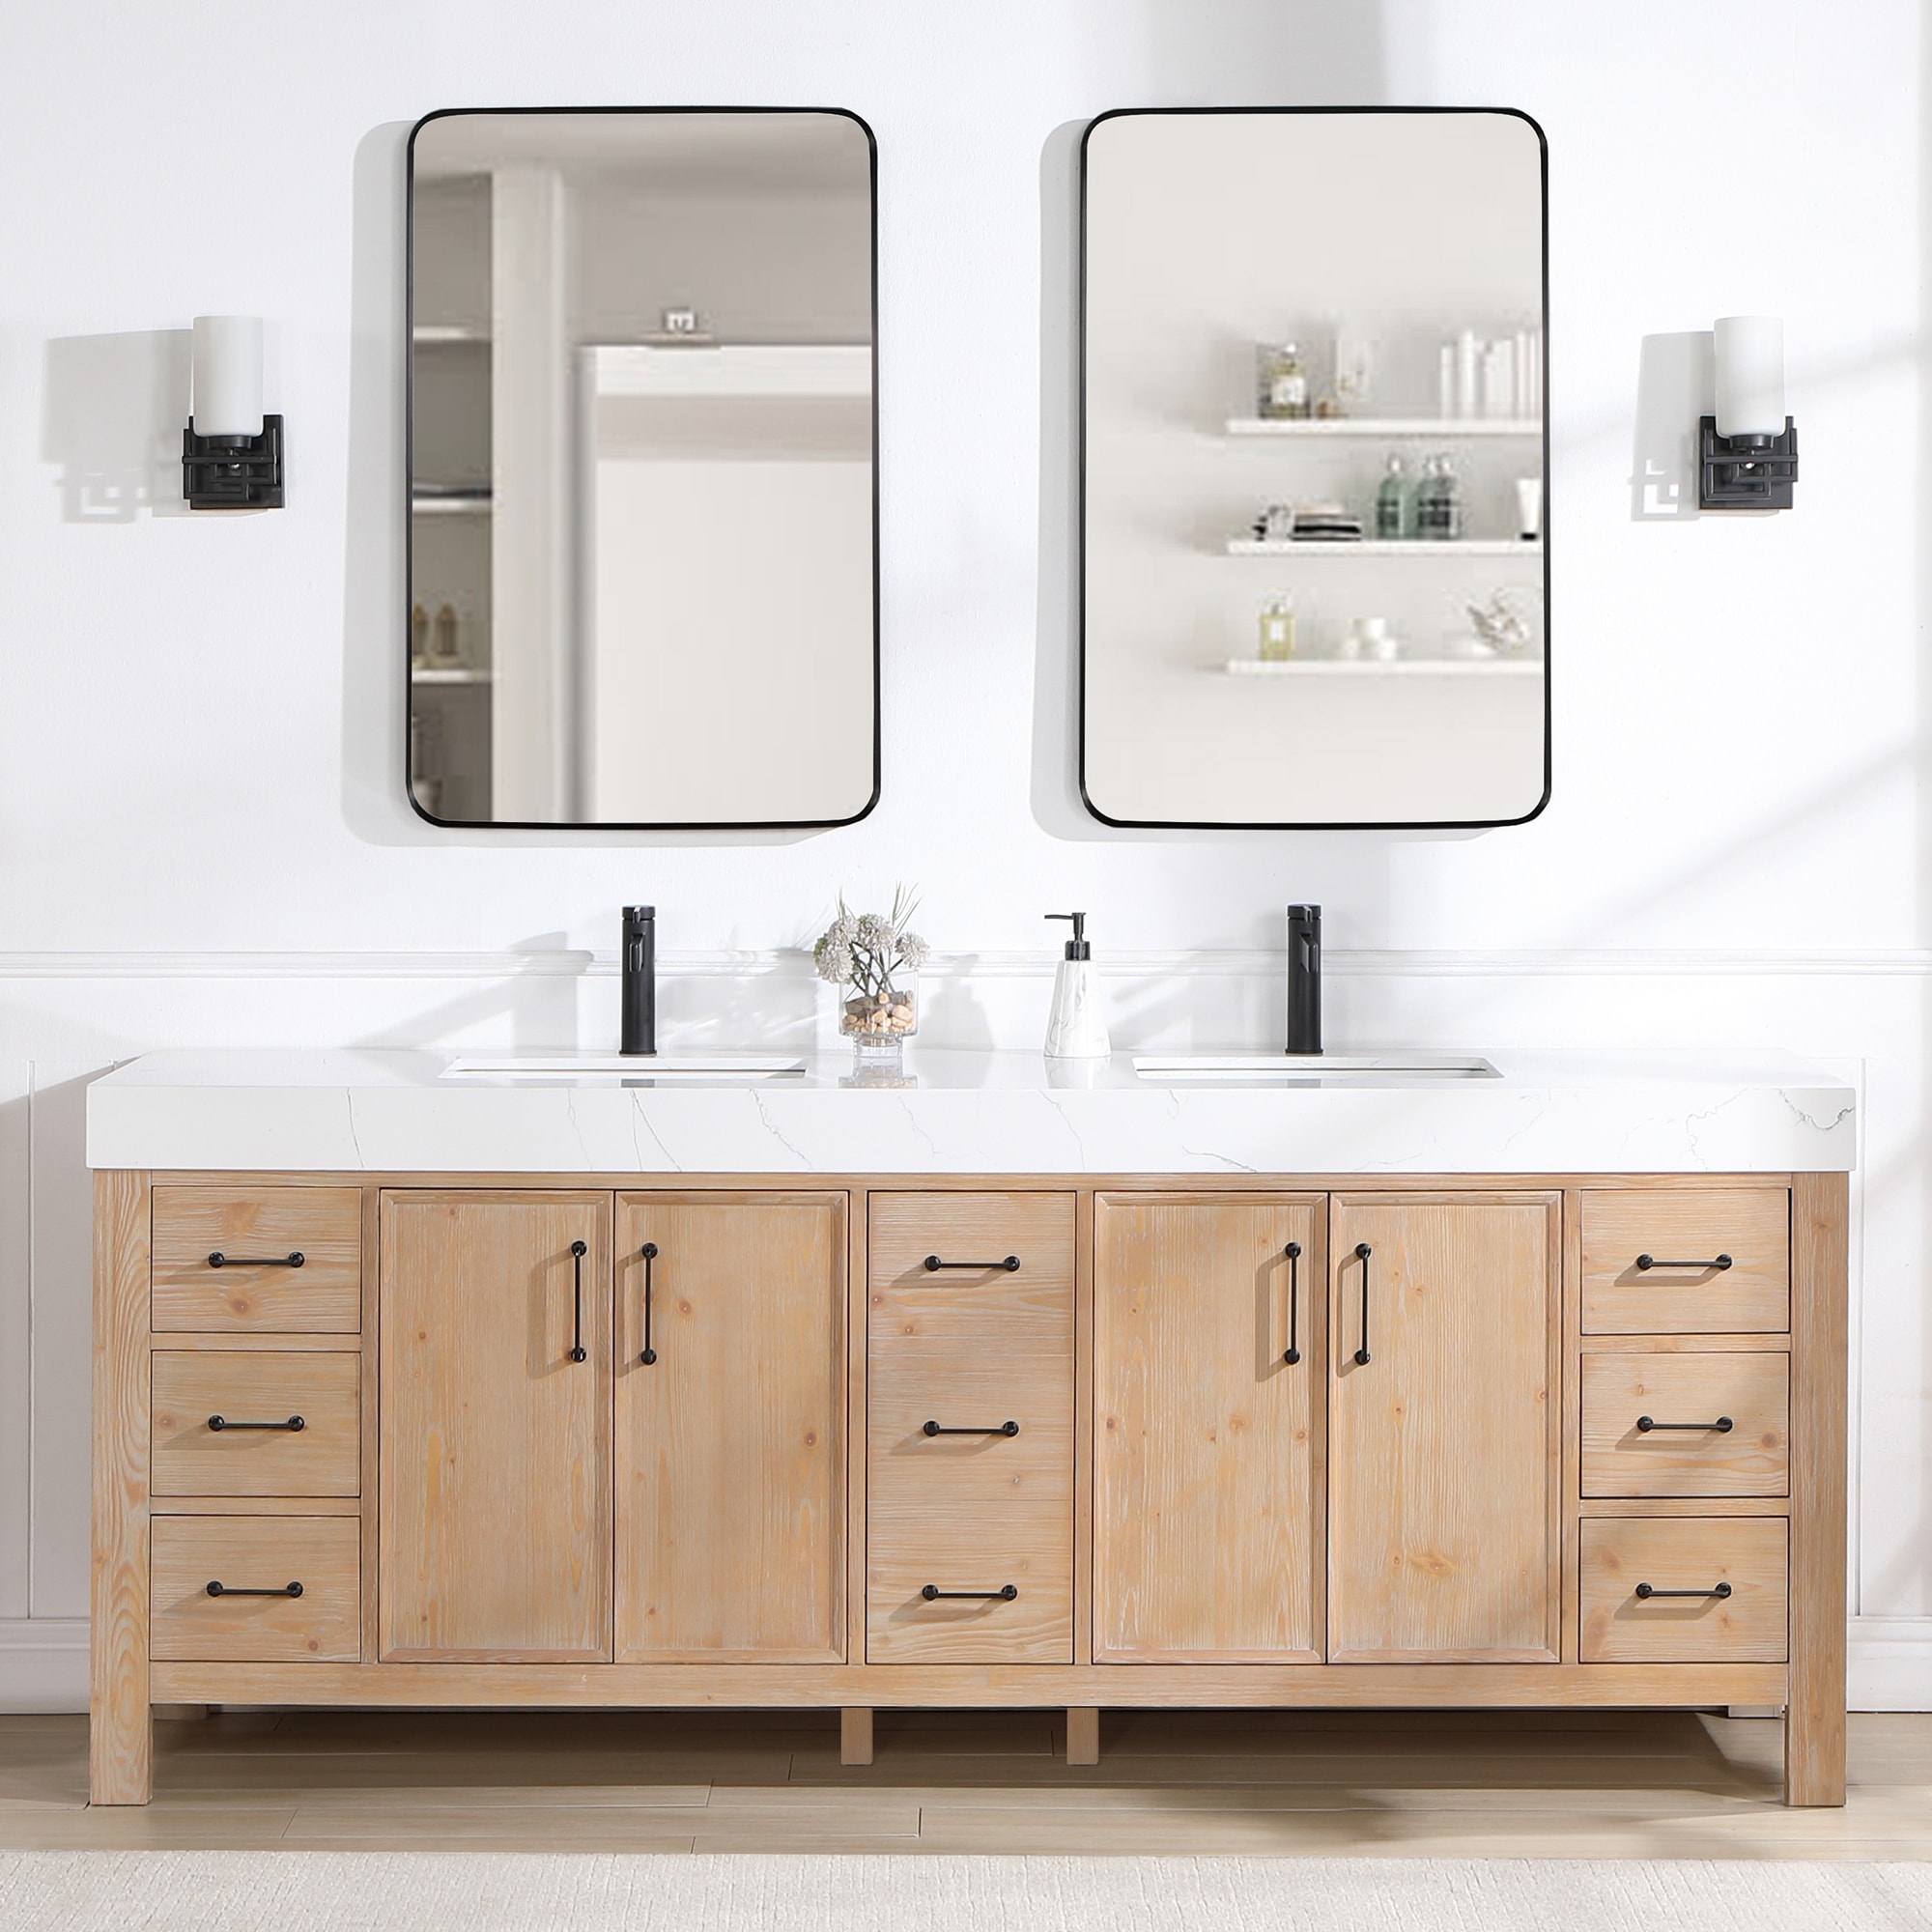 https://ak1.ostkcdn.com/images/products/is/images/direct/84ad3d7903f5b32220f17126f3047bd4683467d2/Leon-84-in.-Double-Bathroom-Vanity-in-Fir-Wood-with-Composite-top.jpg